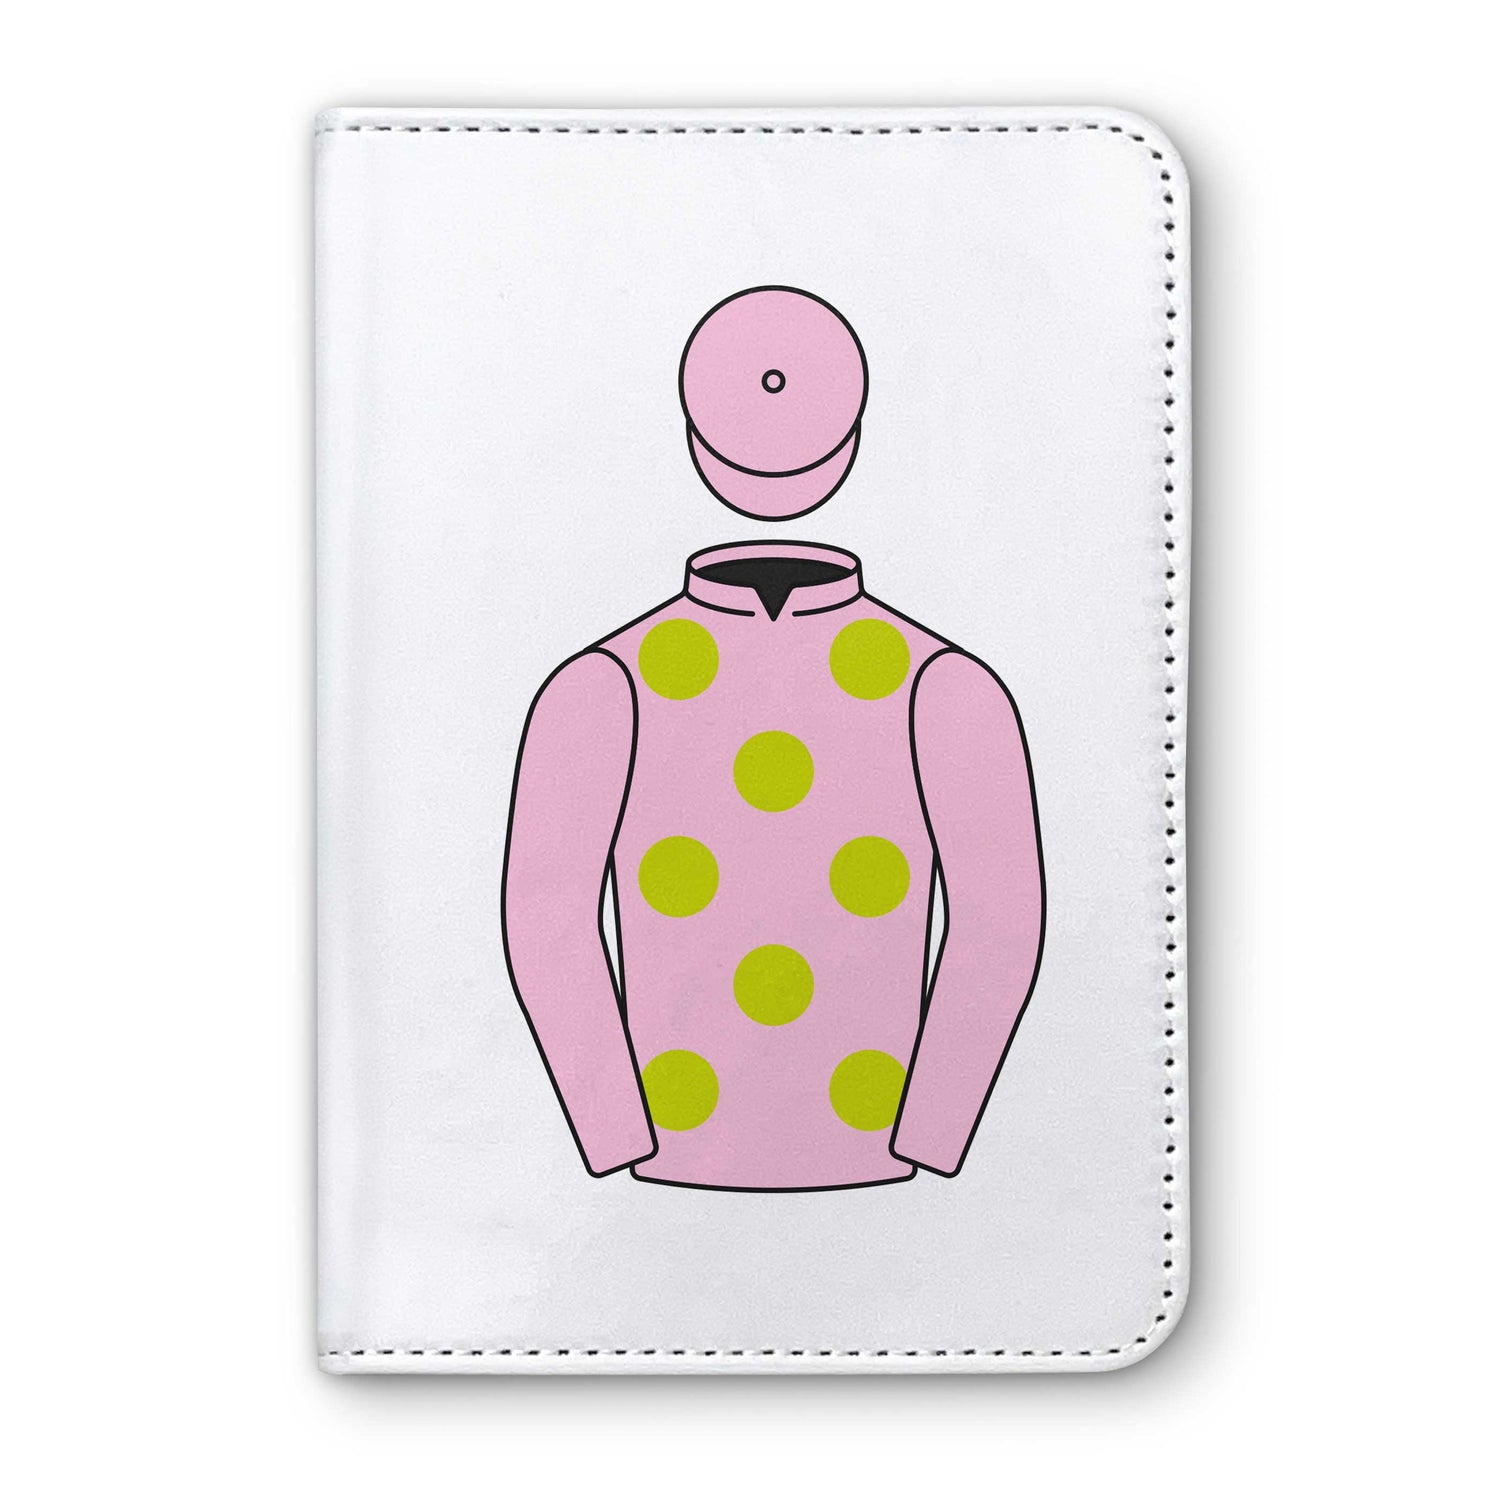 Mrs S Ricci Horse Racing Passport Holder - Hacked Up Horse Racing Gifts